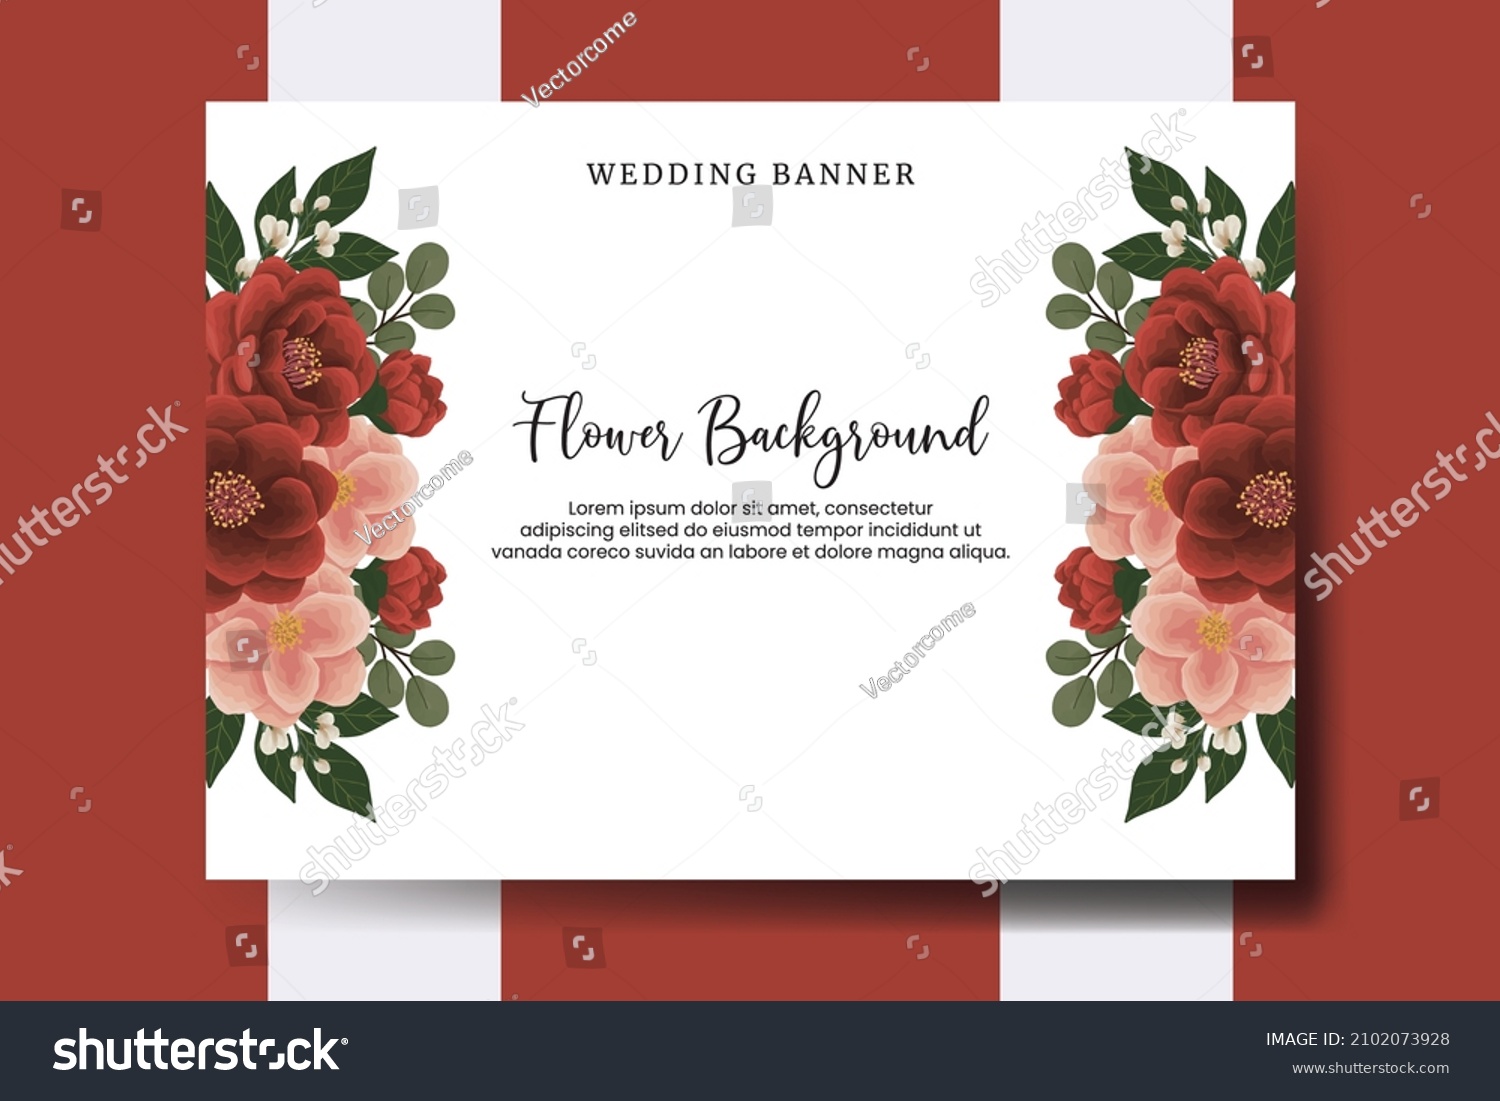 SVG of Wedding banner flower background, Digital watercolor hand drawn Red Peony with Pink Camellia Flower design Template svg